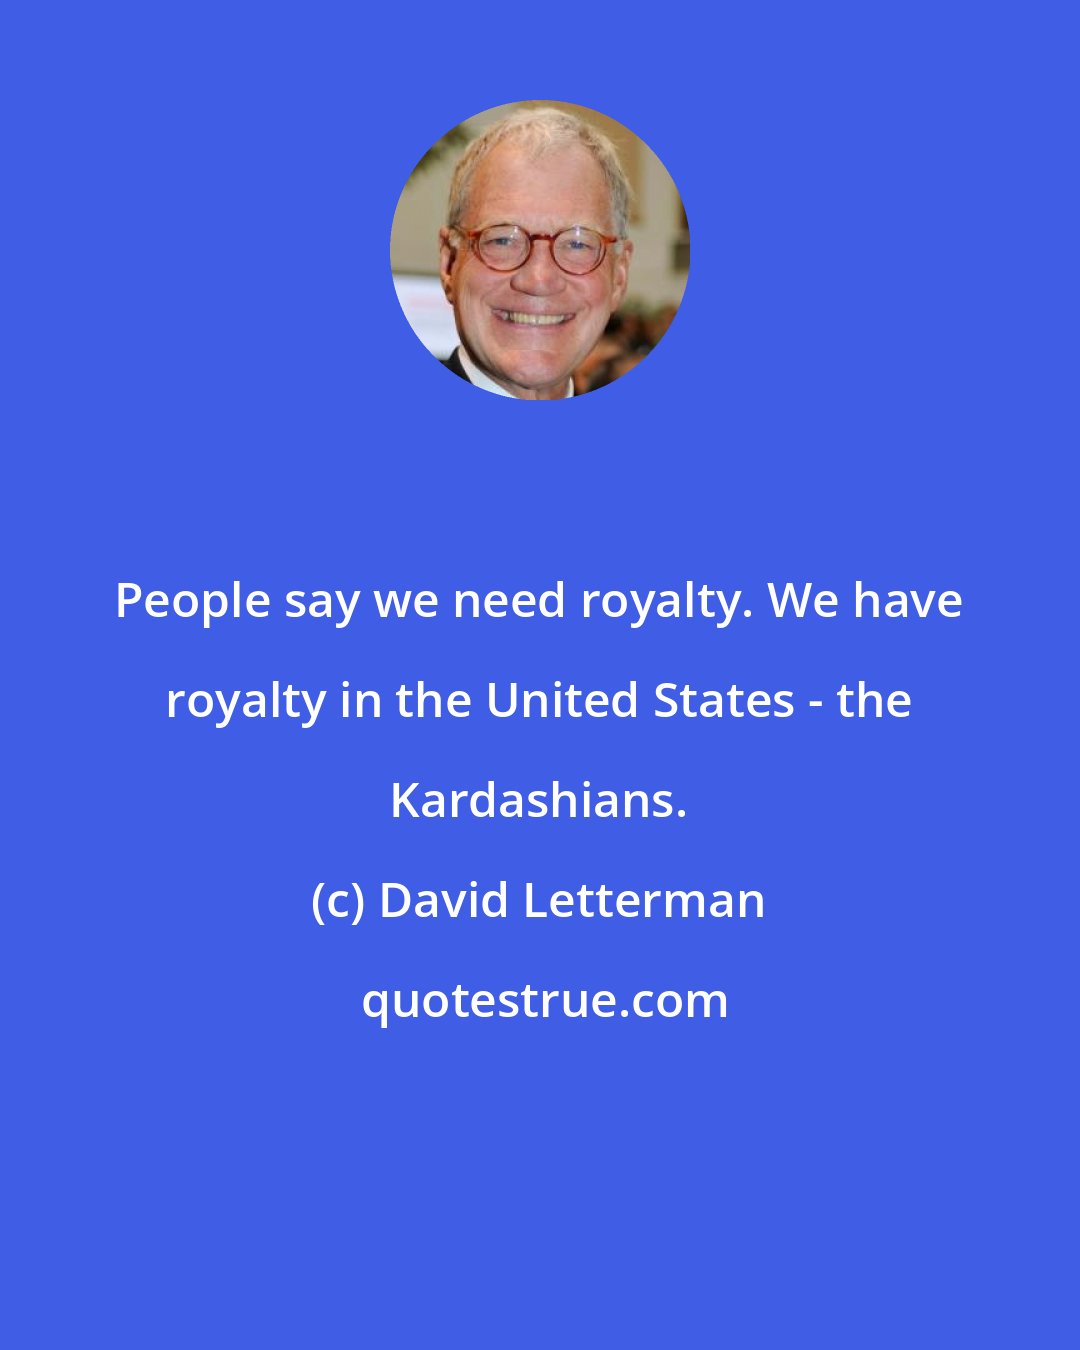 David Letterman: People say we need royalty. We have royalty in the United States - the Kardashians.